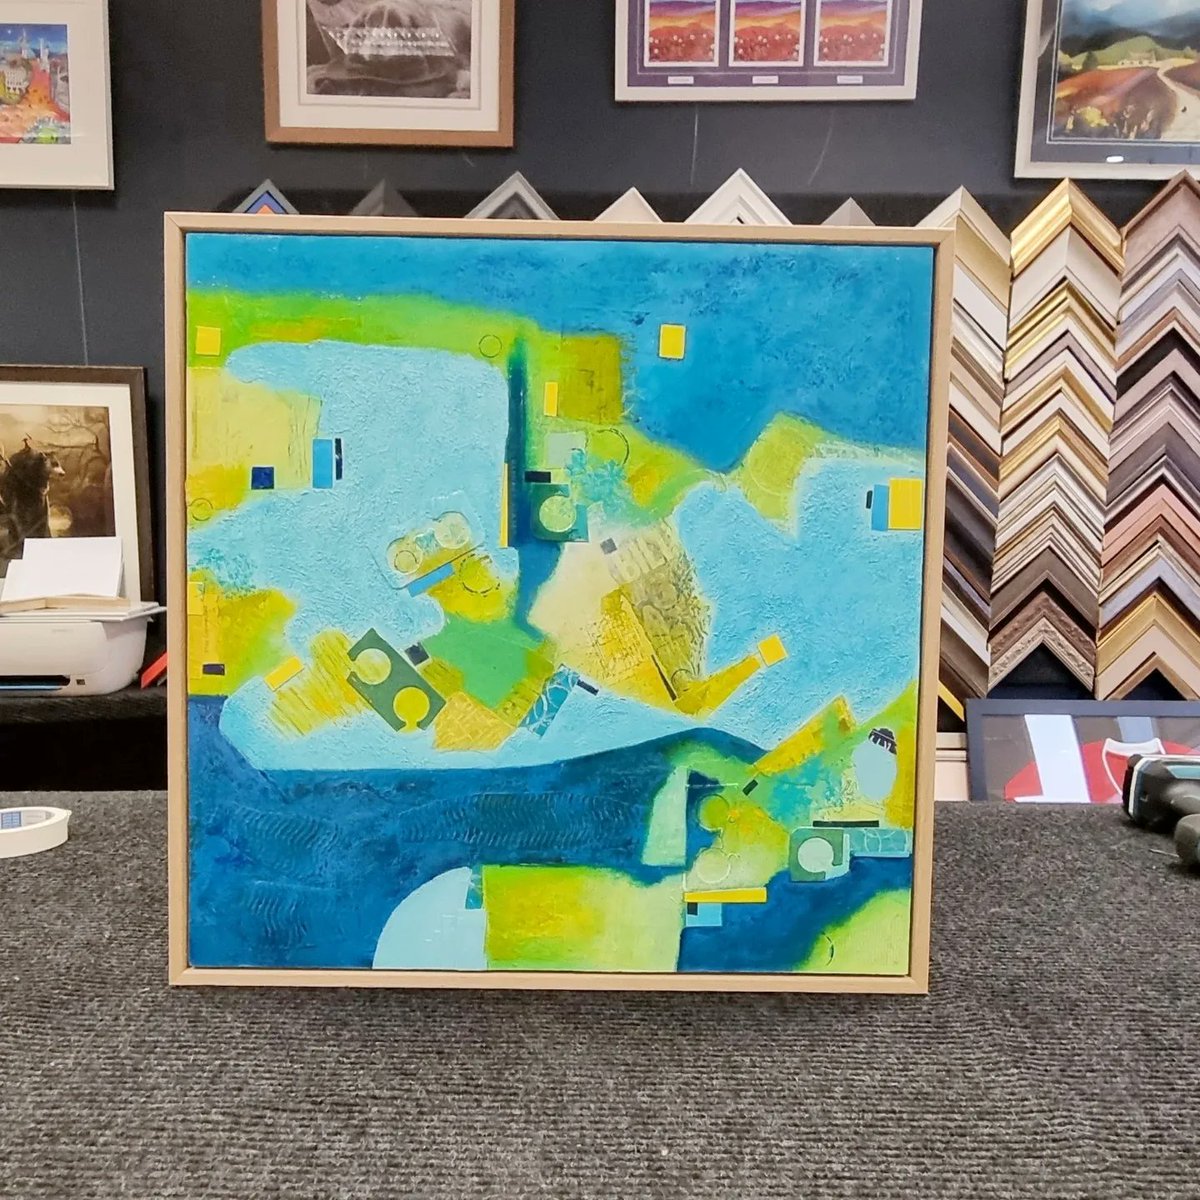 Thanks Kevin @framingpointaberdeen for my latest frames. I'm really pleased that we decided on this oak tray frame for this particular painting.

#artforyourhome #collageabstract #collage #contemporaryartist #colourfulpaintings #artforyourhome #originalartwork  #buyoriginalart